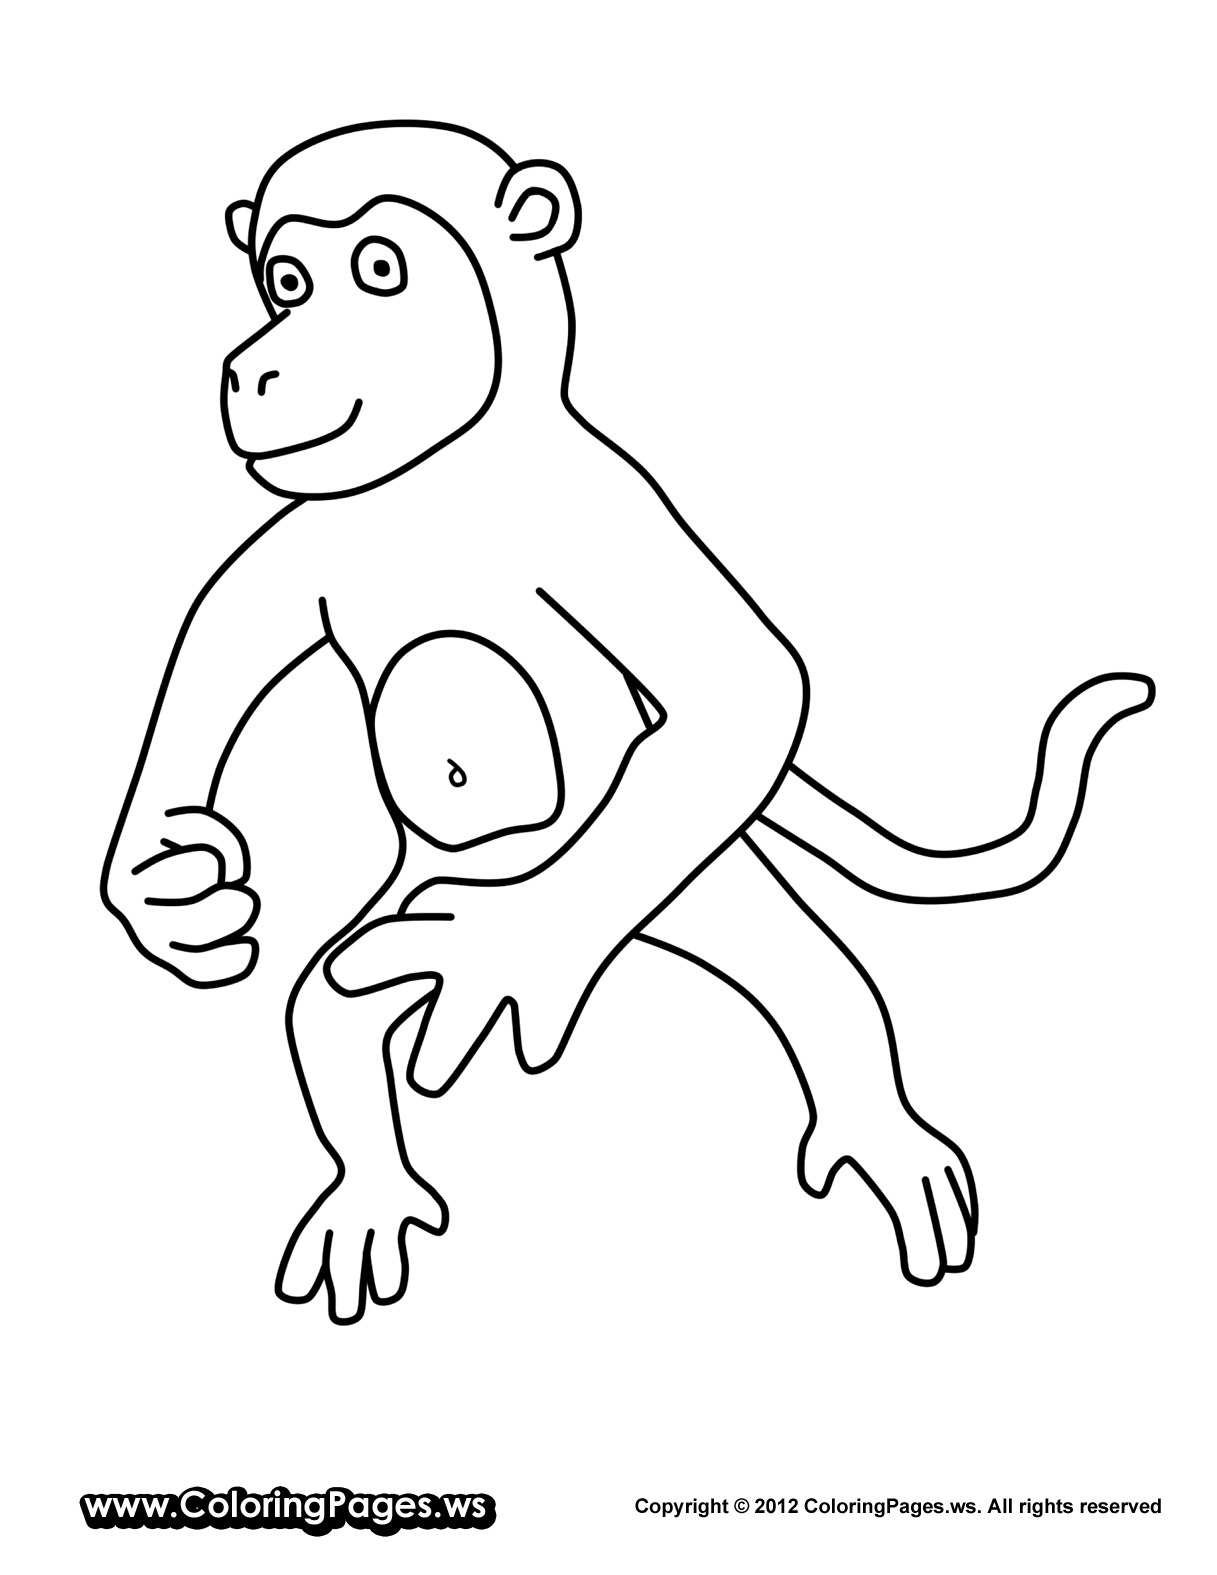 Monkey coloring pages | Monkey coloring page | #28